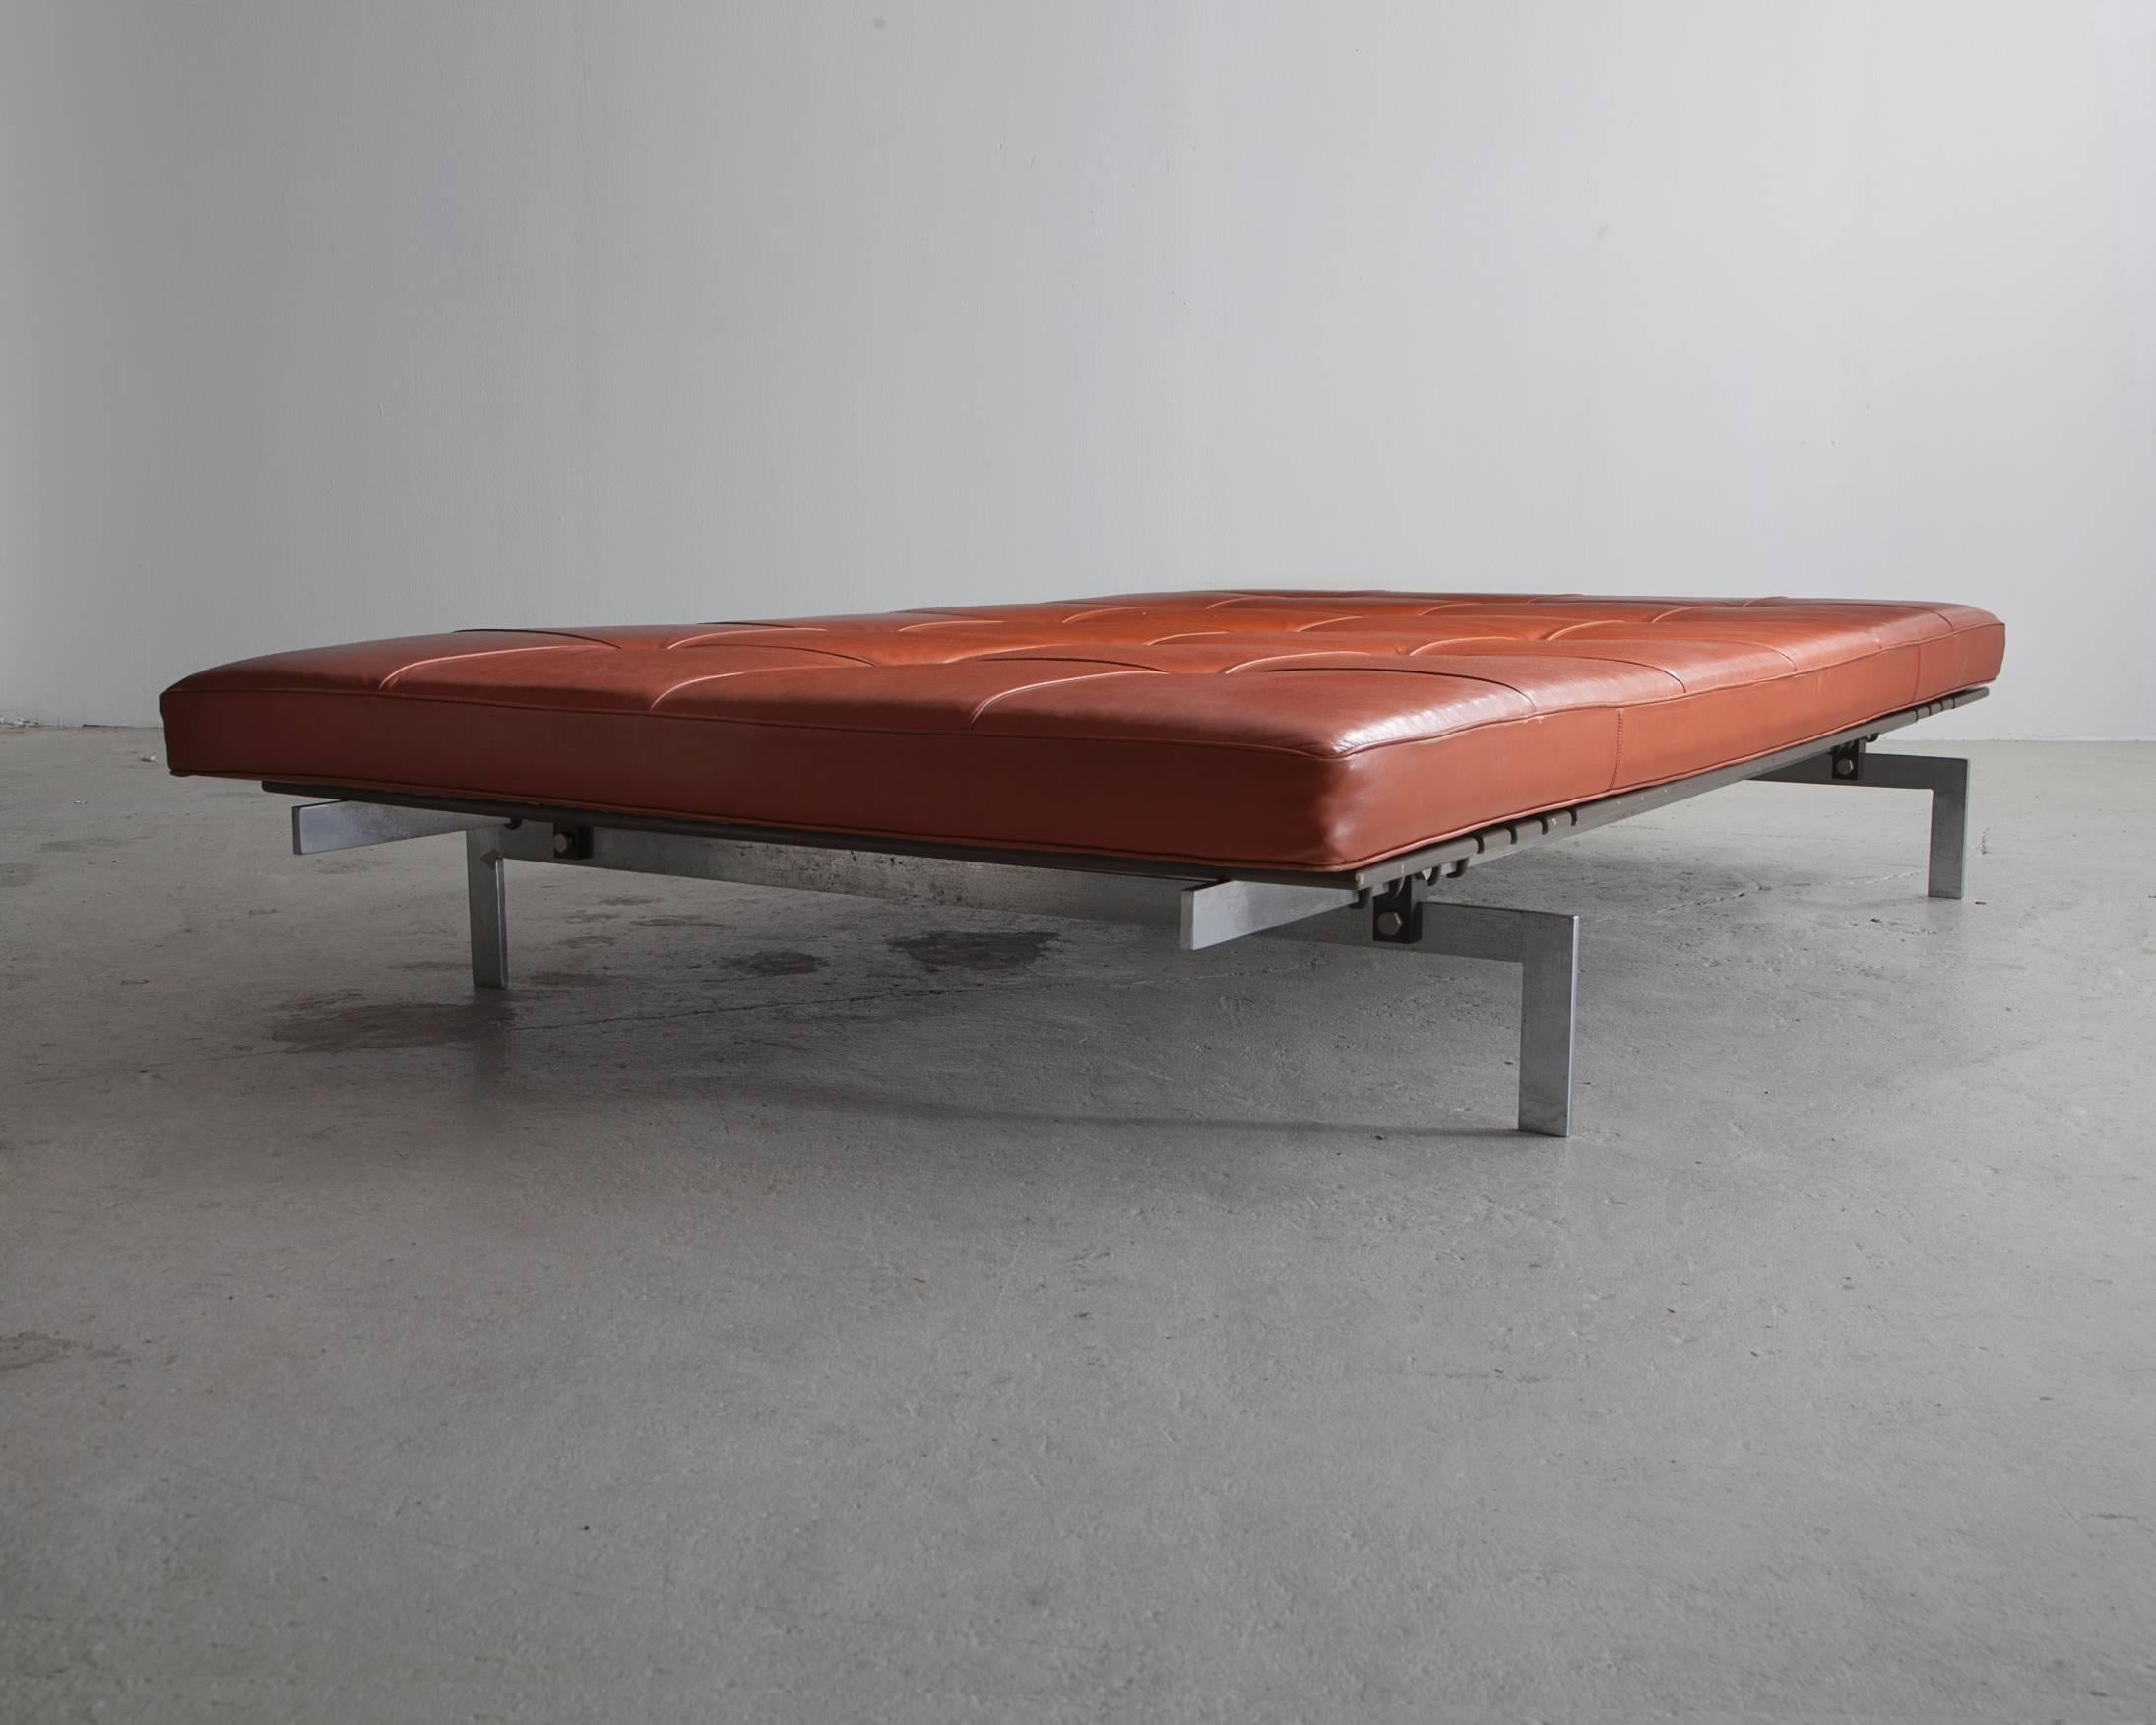 CO563.

Unique extra wide PK 80 daybed with a steel frame and leather upholstery. Designed by Poul Kjaerholm for E. Kold Christensen, Denmark, circa 1968.